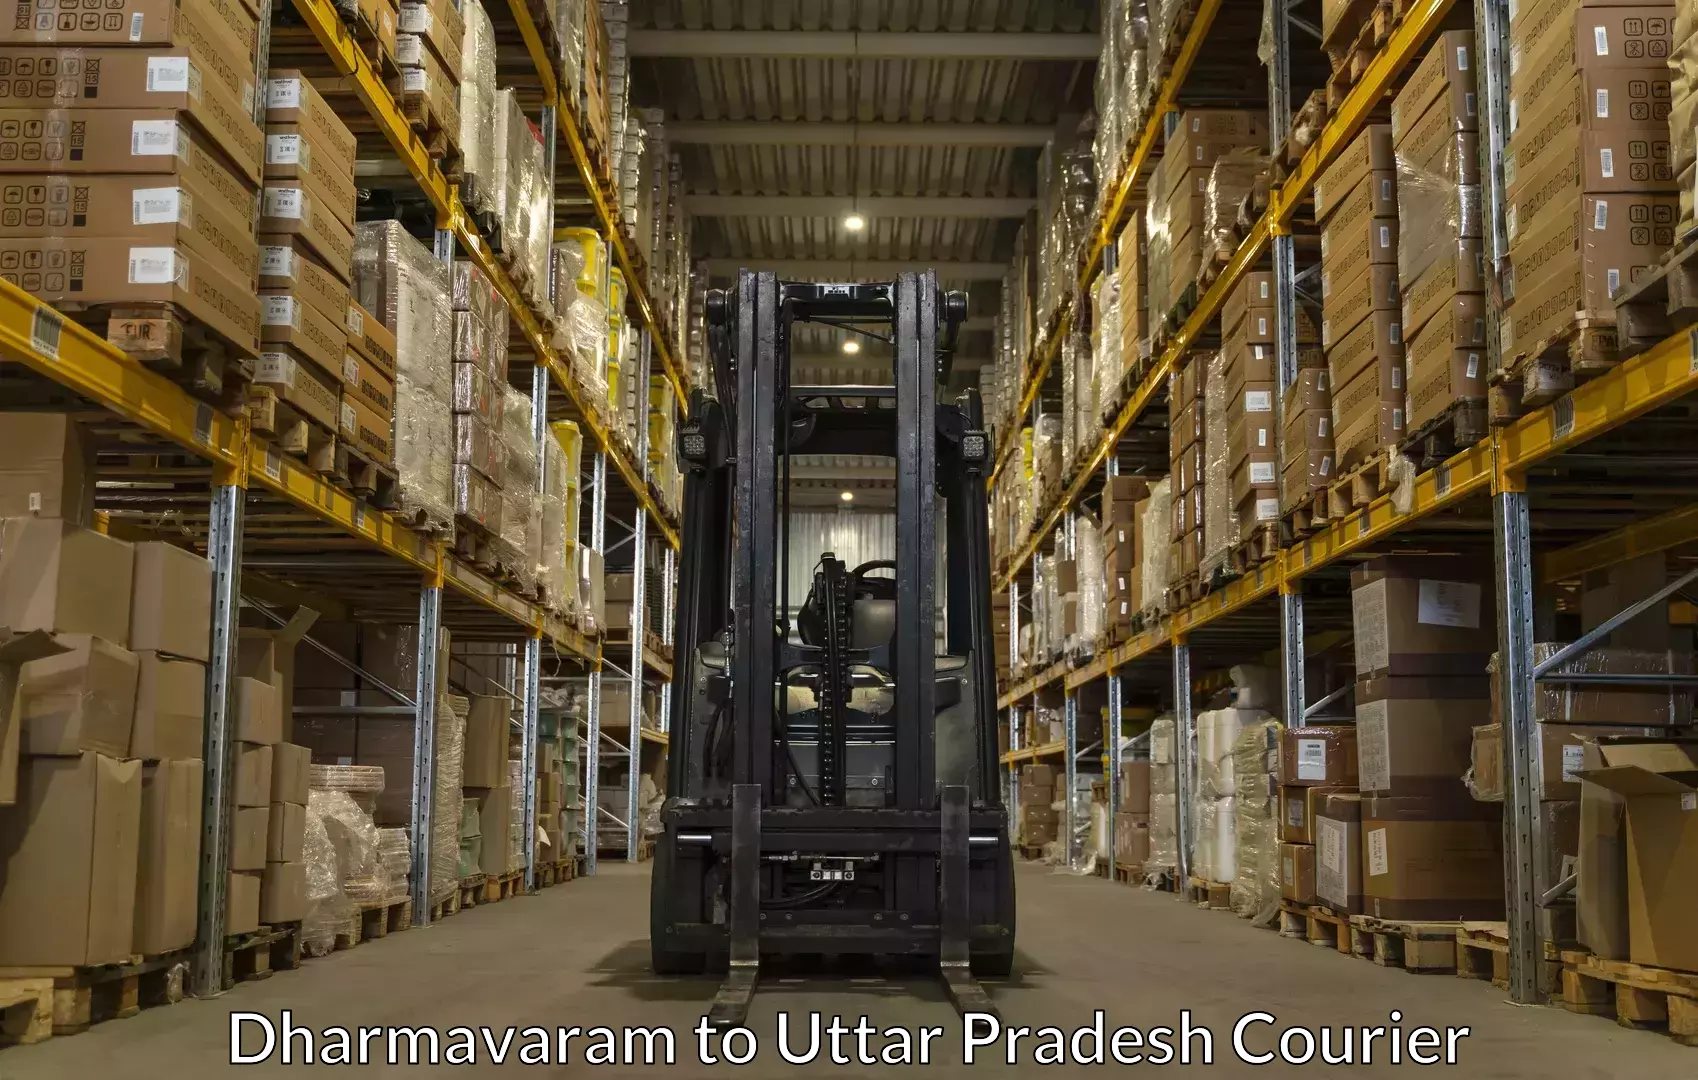 Quality moving services in Dharmavaram to Agra